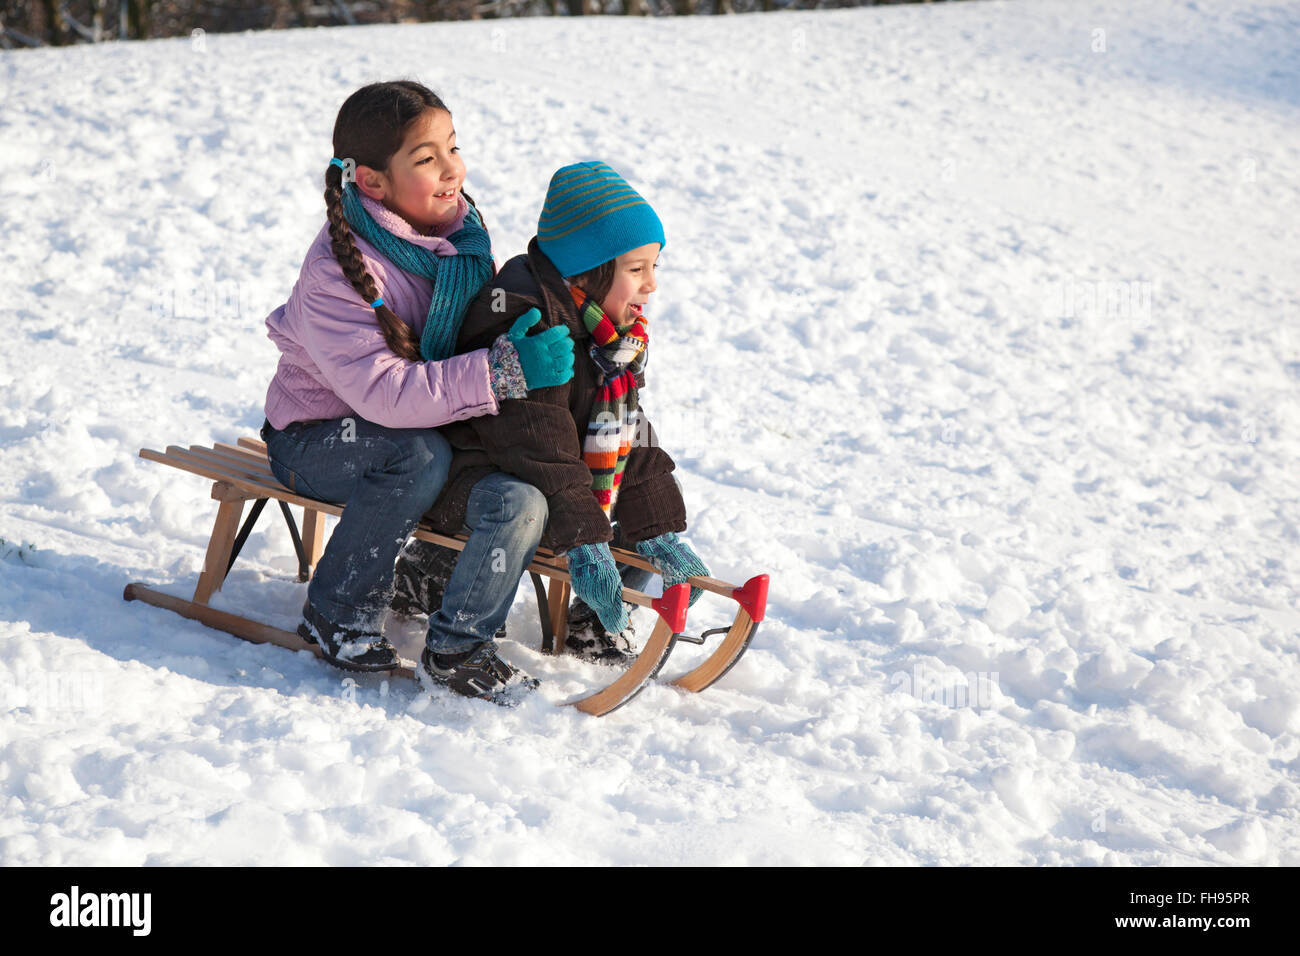 Two children on a sled having fun in the snow Stock Photo